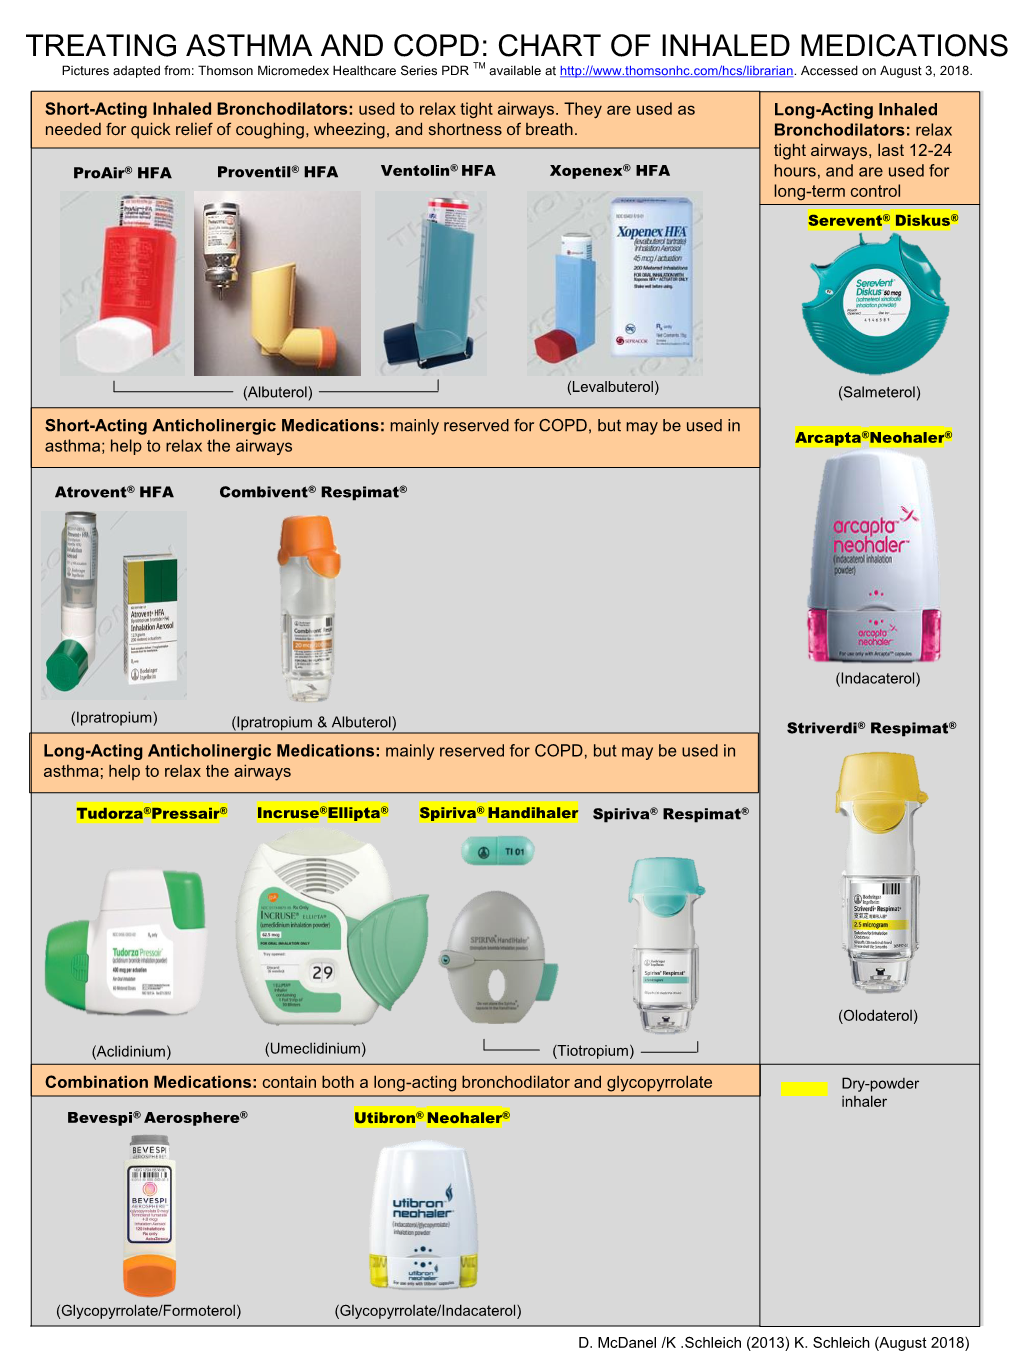 Treating Asthma and Copd: Chart of Inhaled Medications